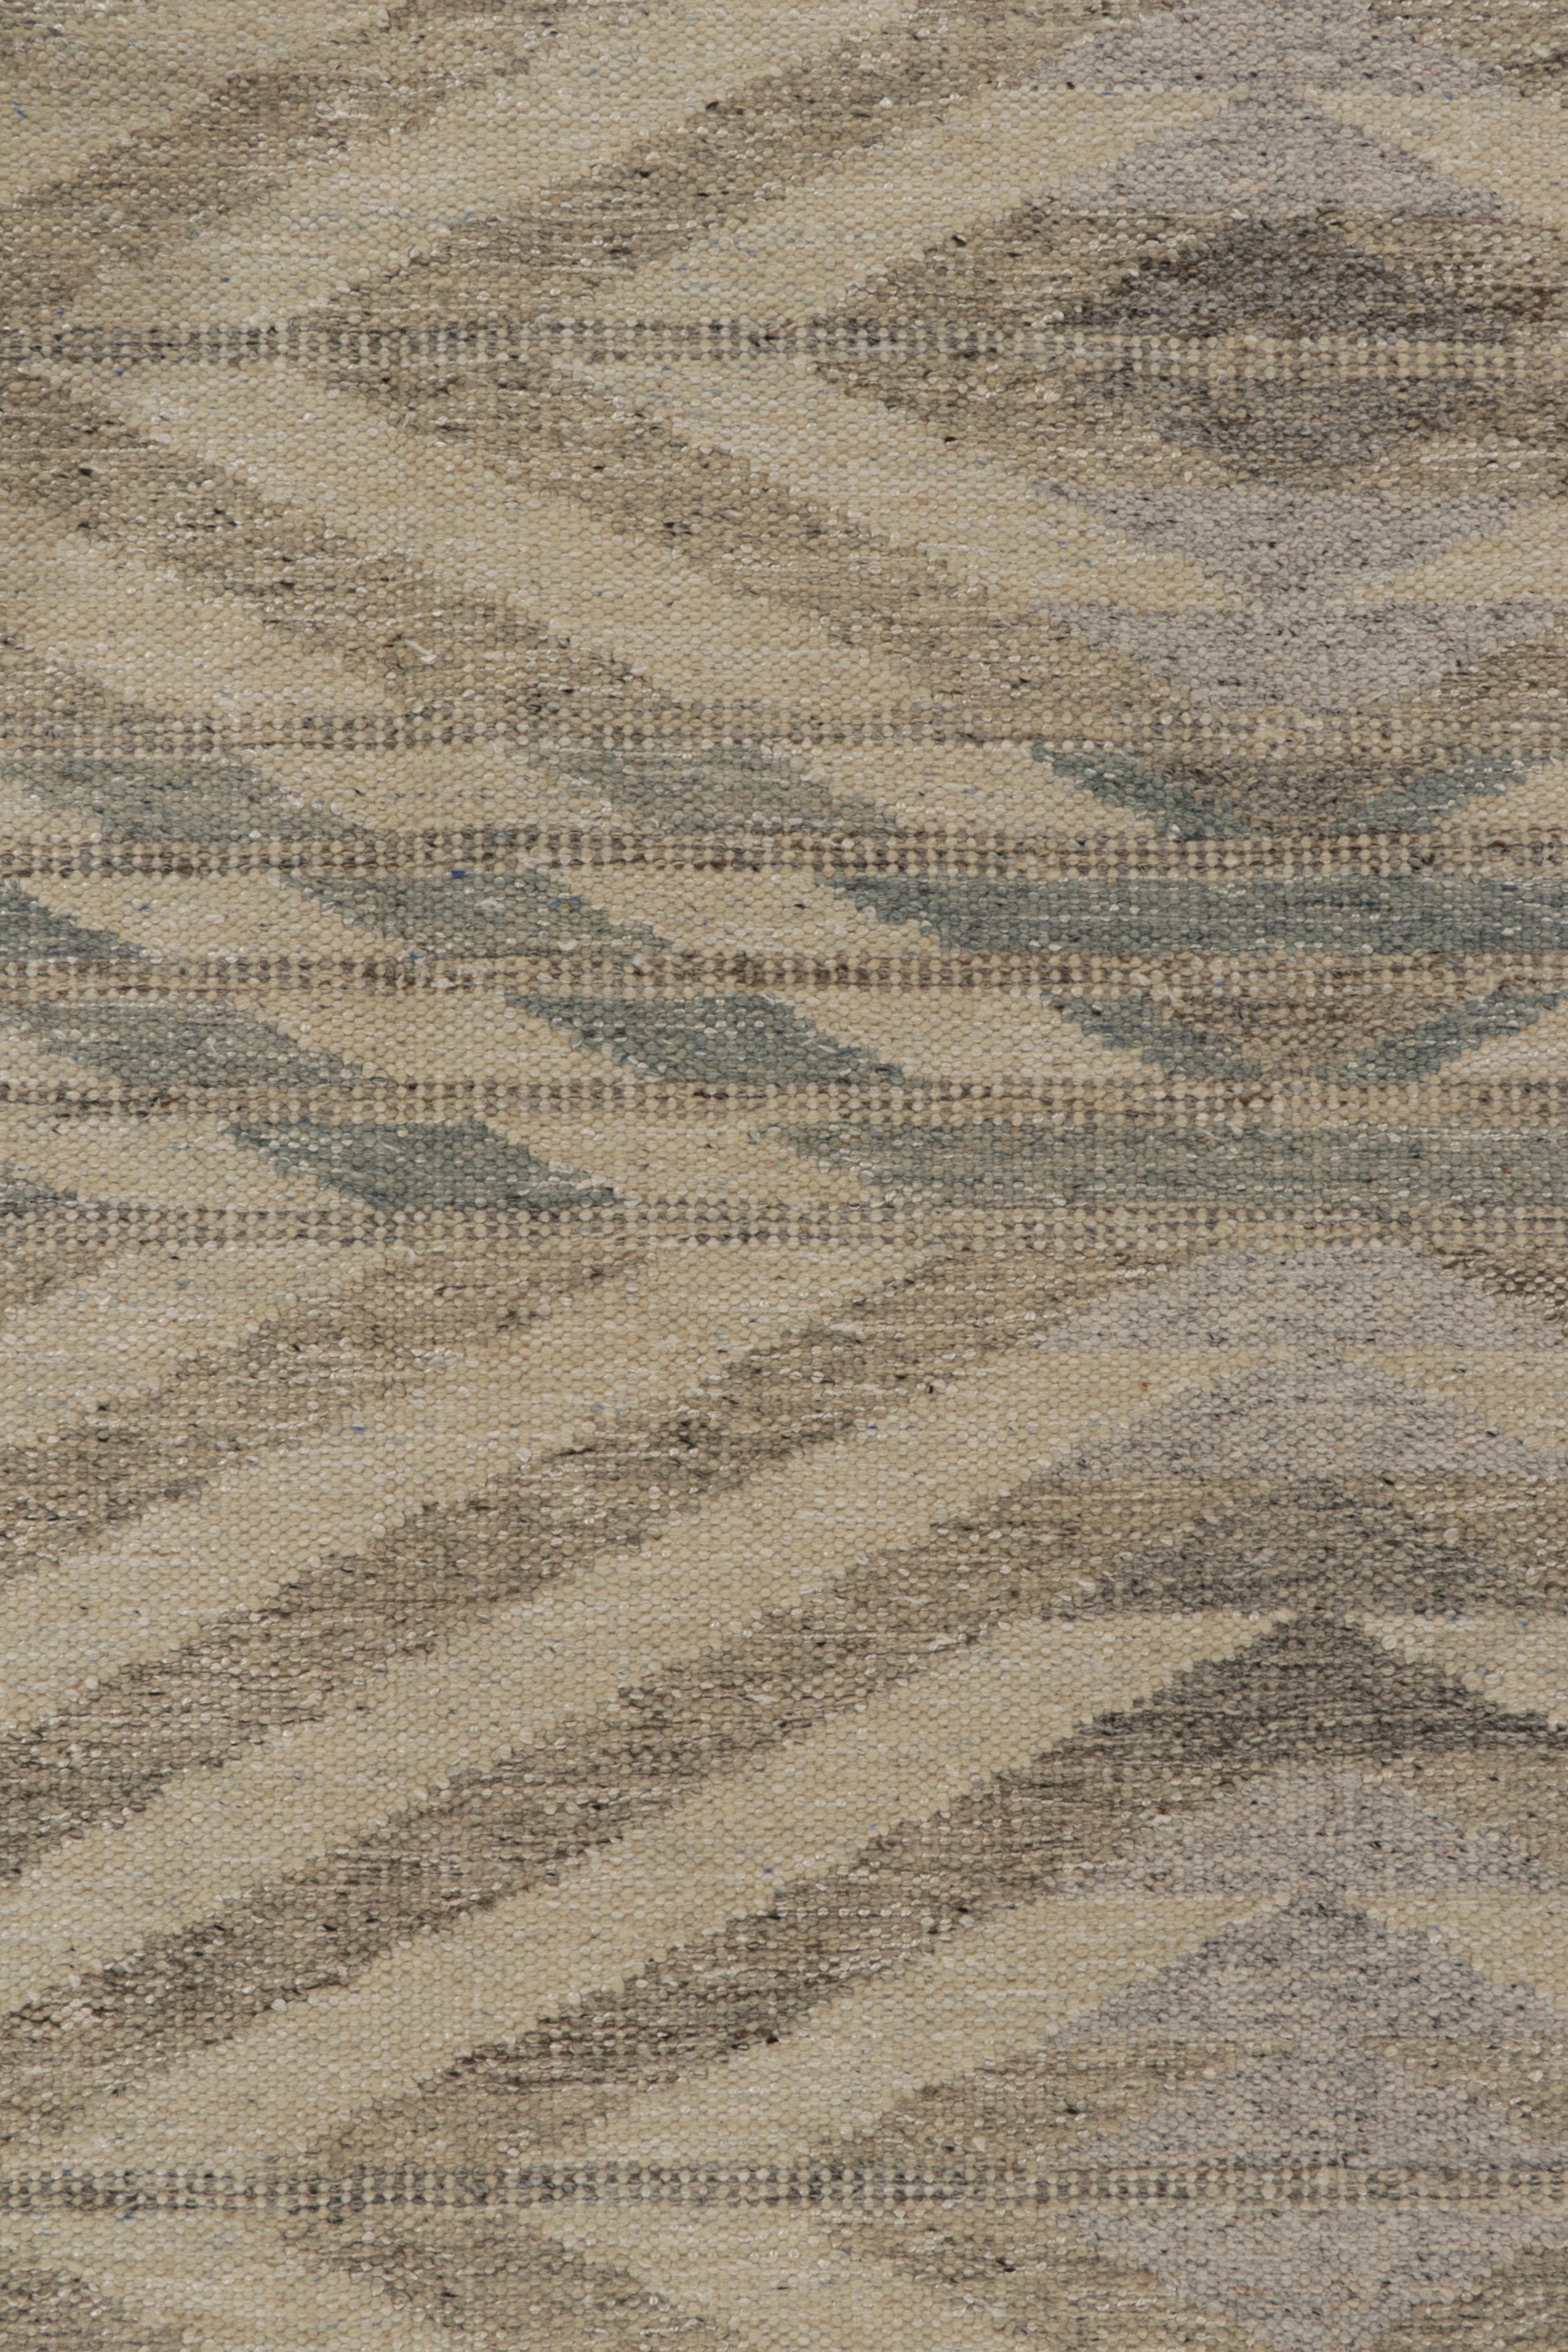 Modern Rug & Kilim’s Scandinavian Style Kilim in Beige-Brown and Blue Chevrons For Sale